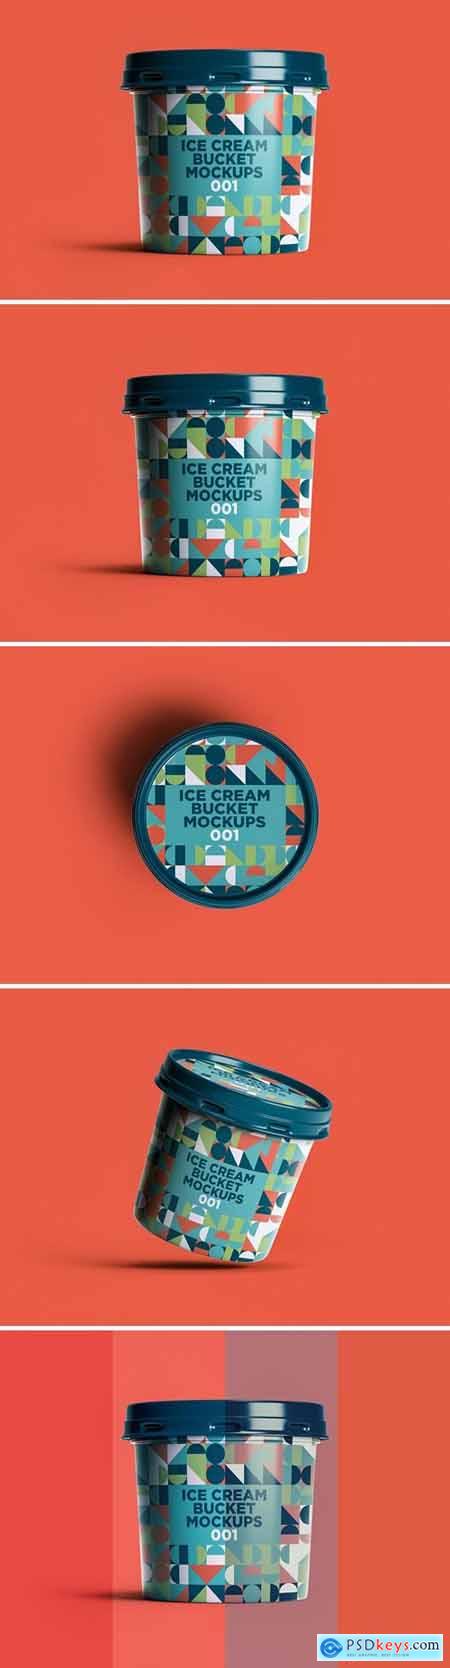 Logo and Product Mock-ups » page 146 » Free Download Photoshop Vector Stock image Via Torrent ...